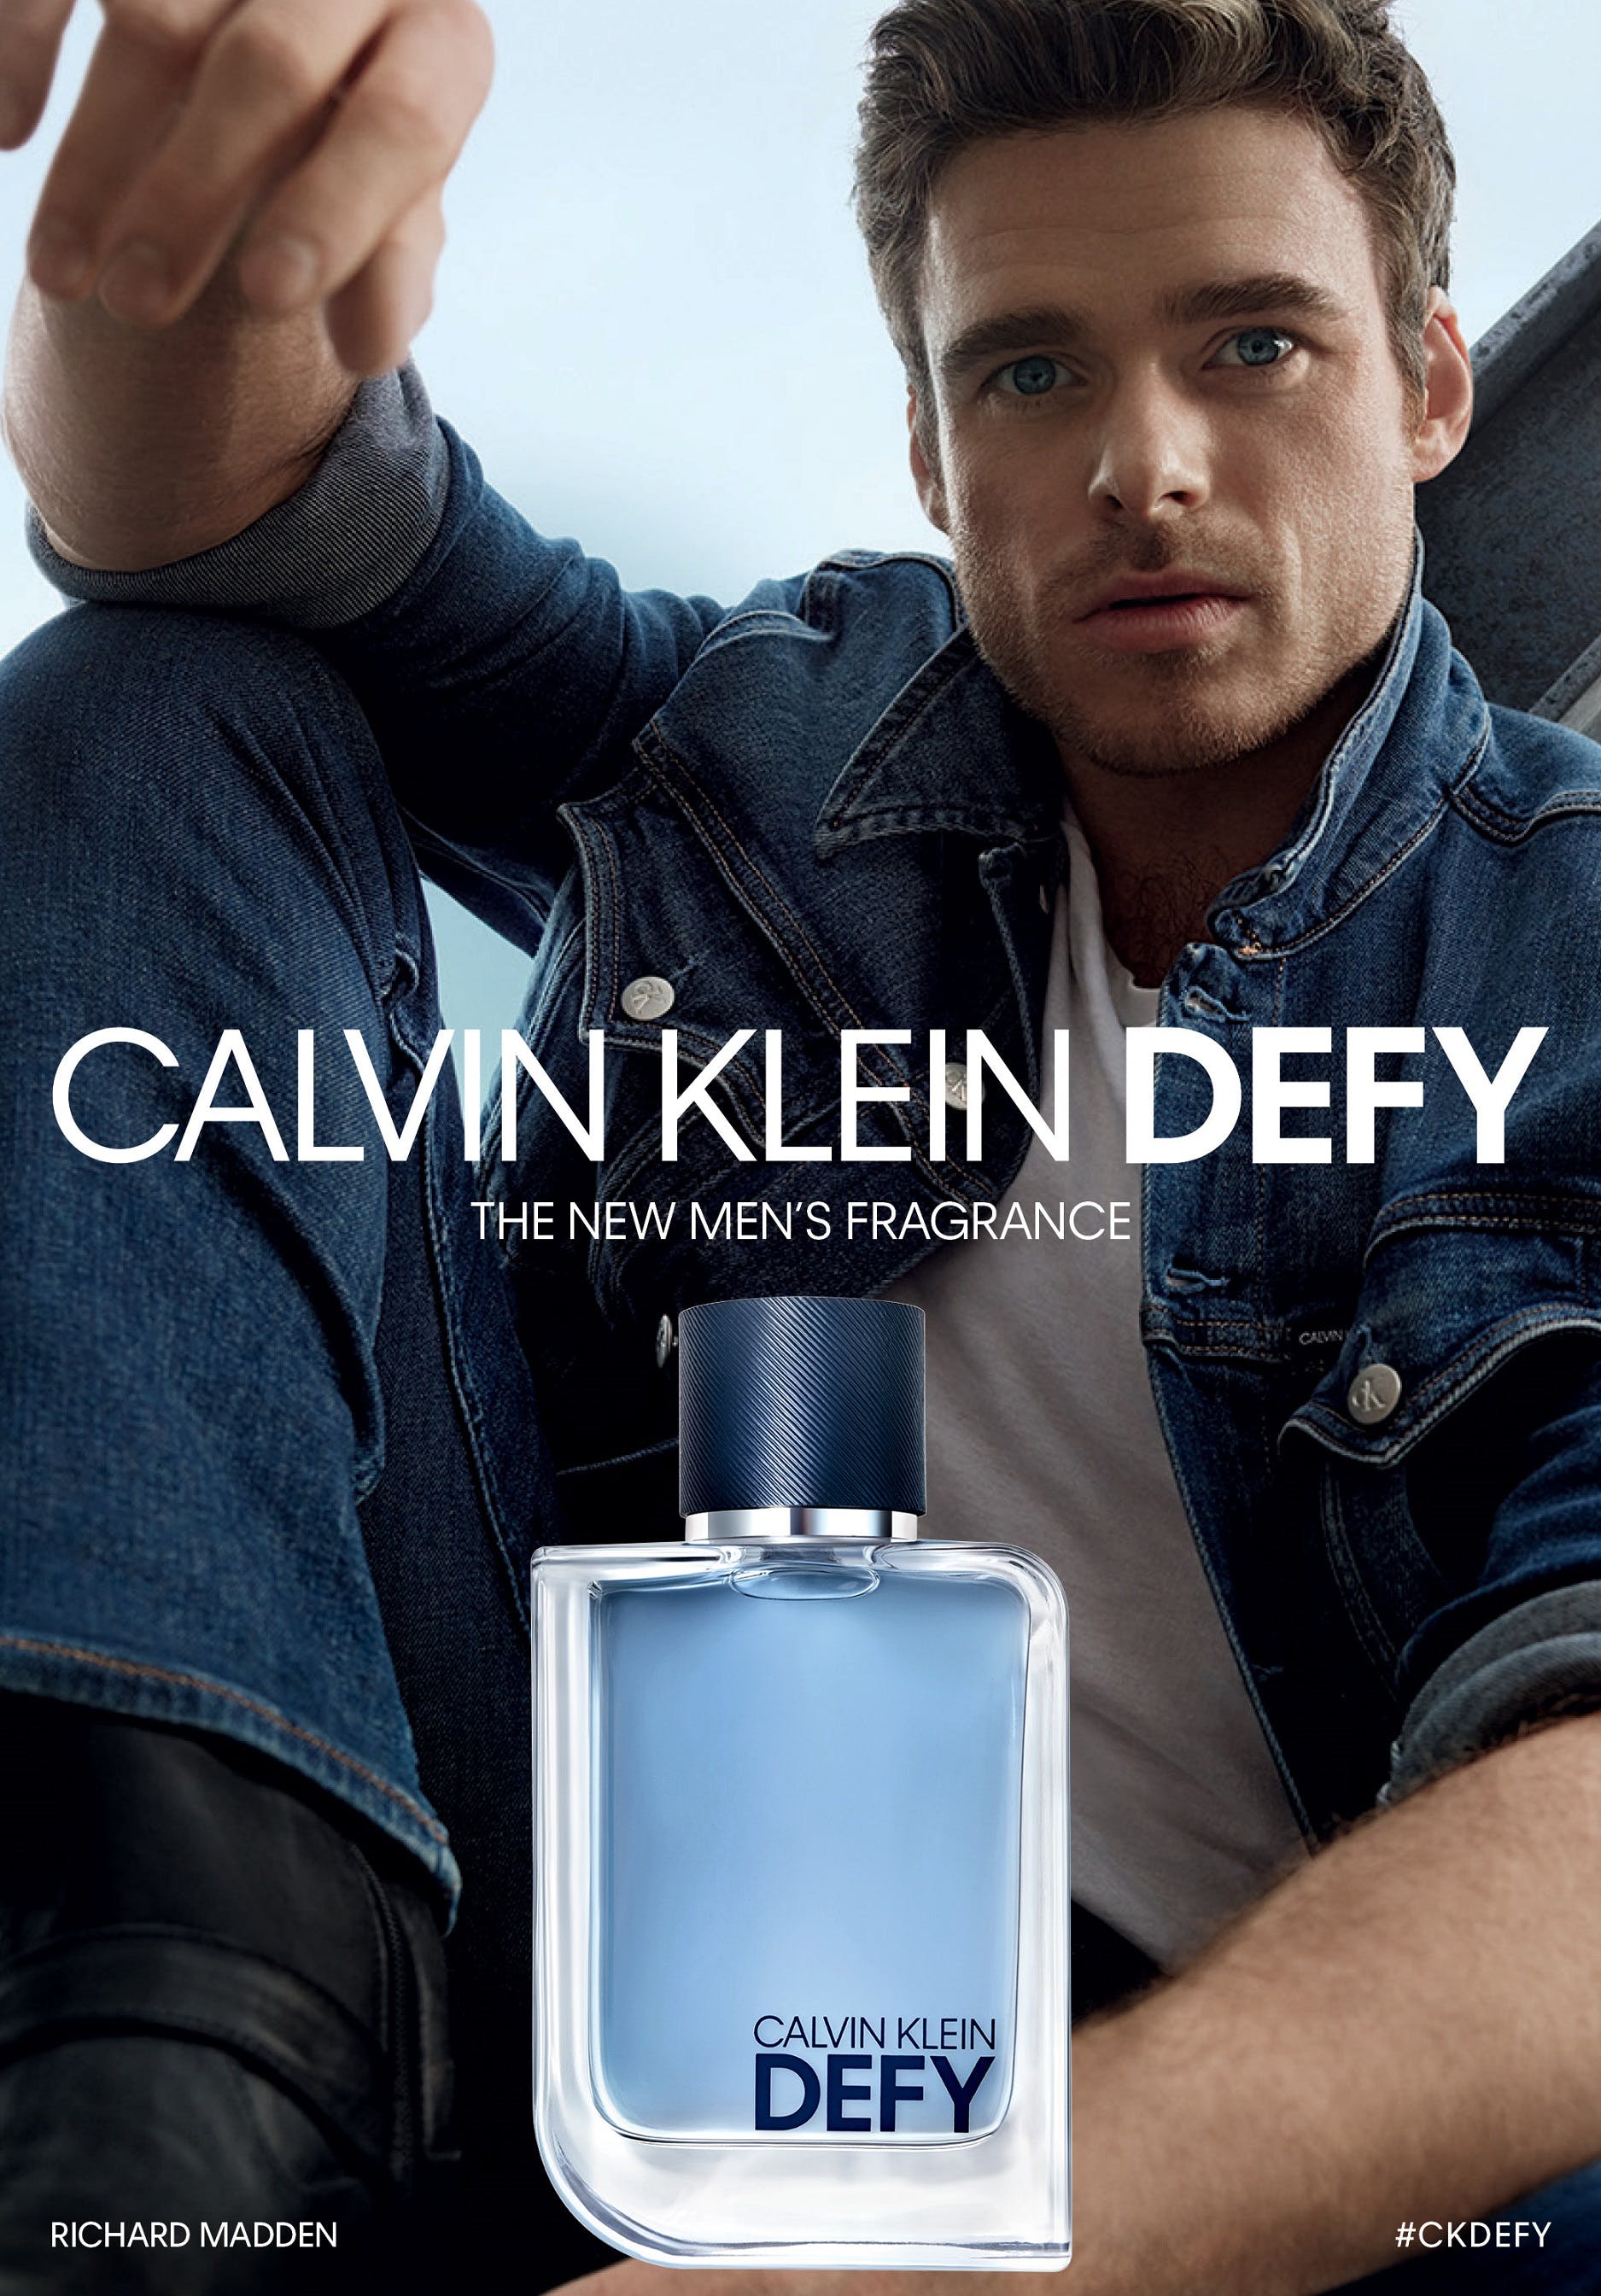 Richard Madden Defies the Odds for Calvin Klein's New Fragrance